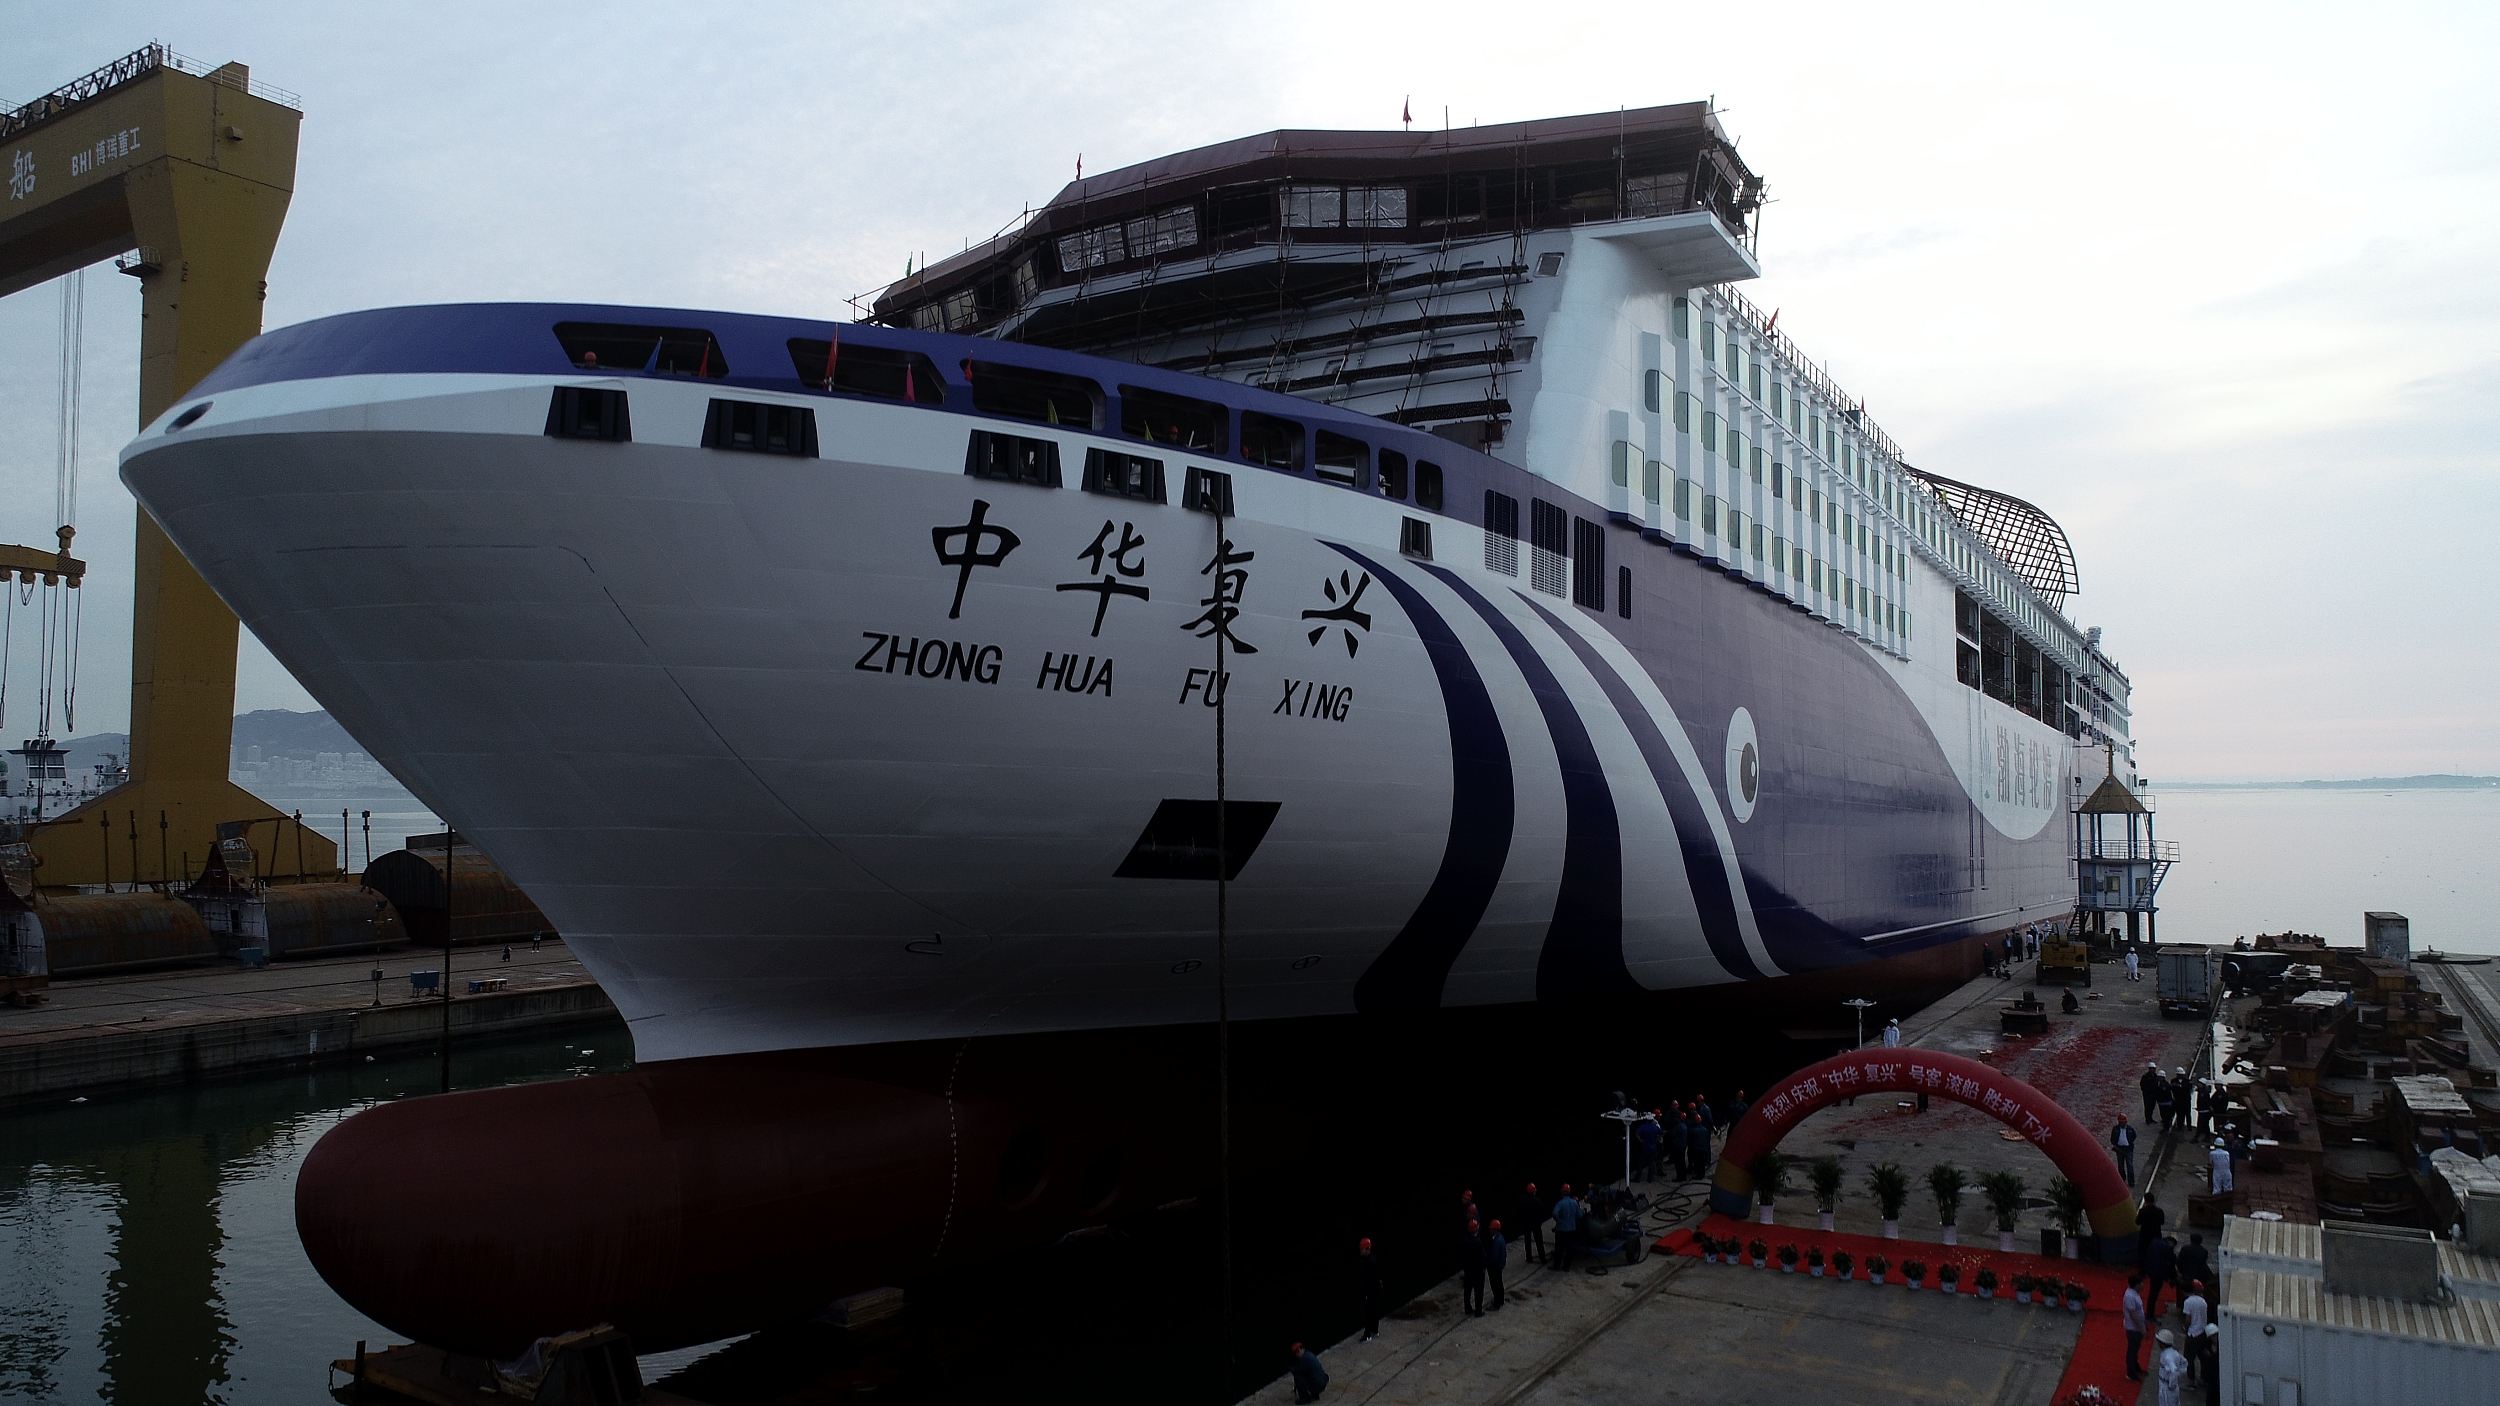 Asia's largest luxurious ro-ro passenger ship  “ZHONG HUA FU XING” is being launched successfully. 